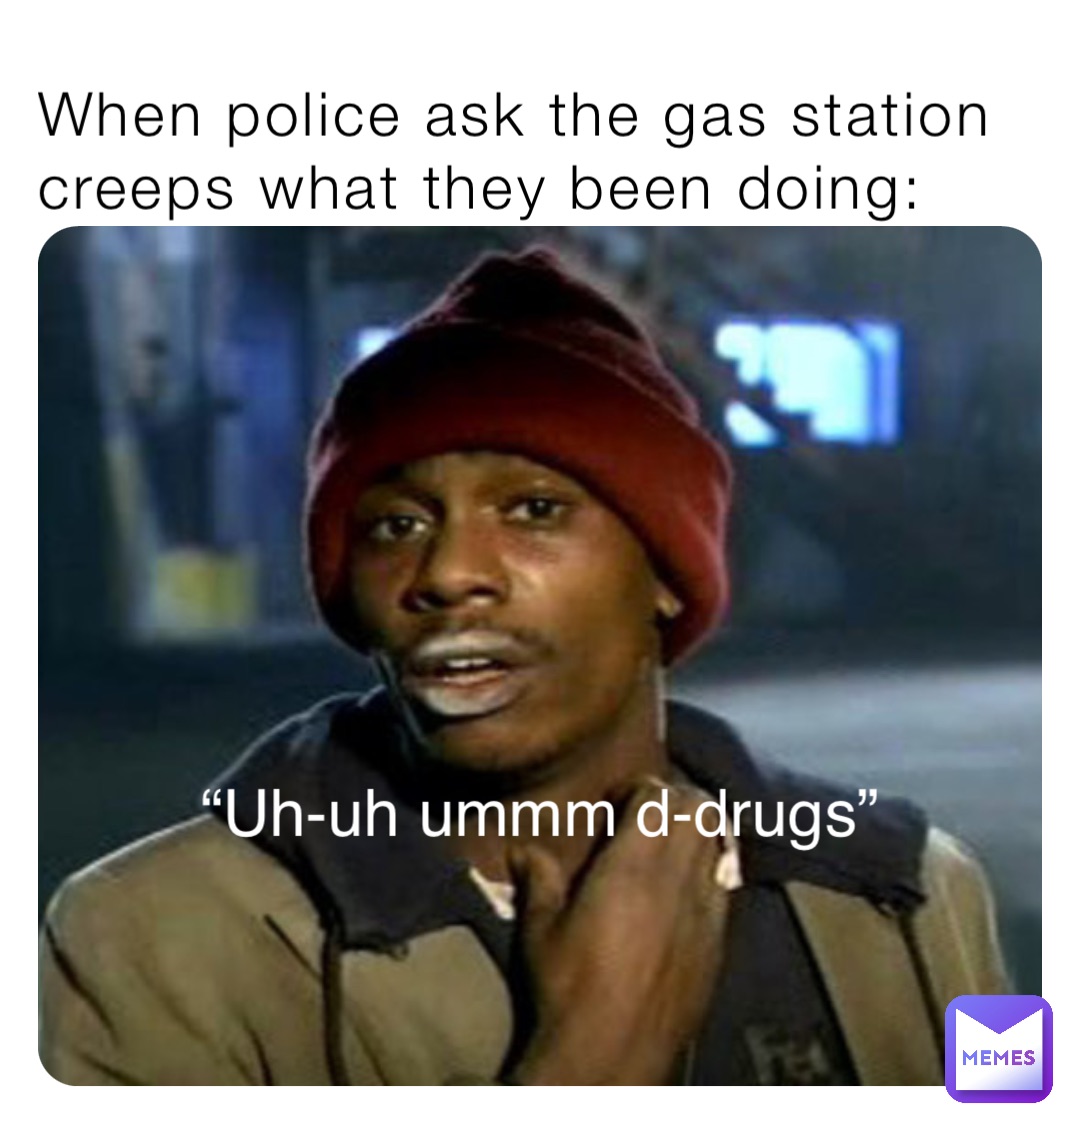 When the police